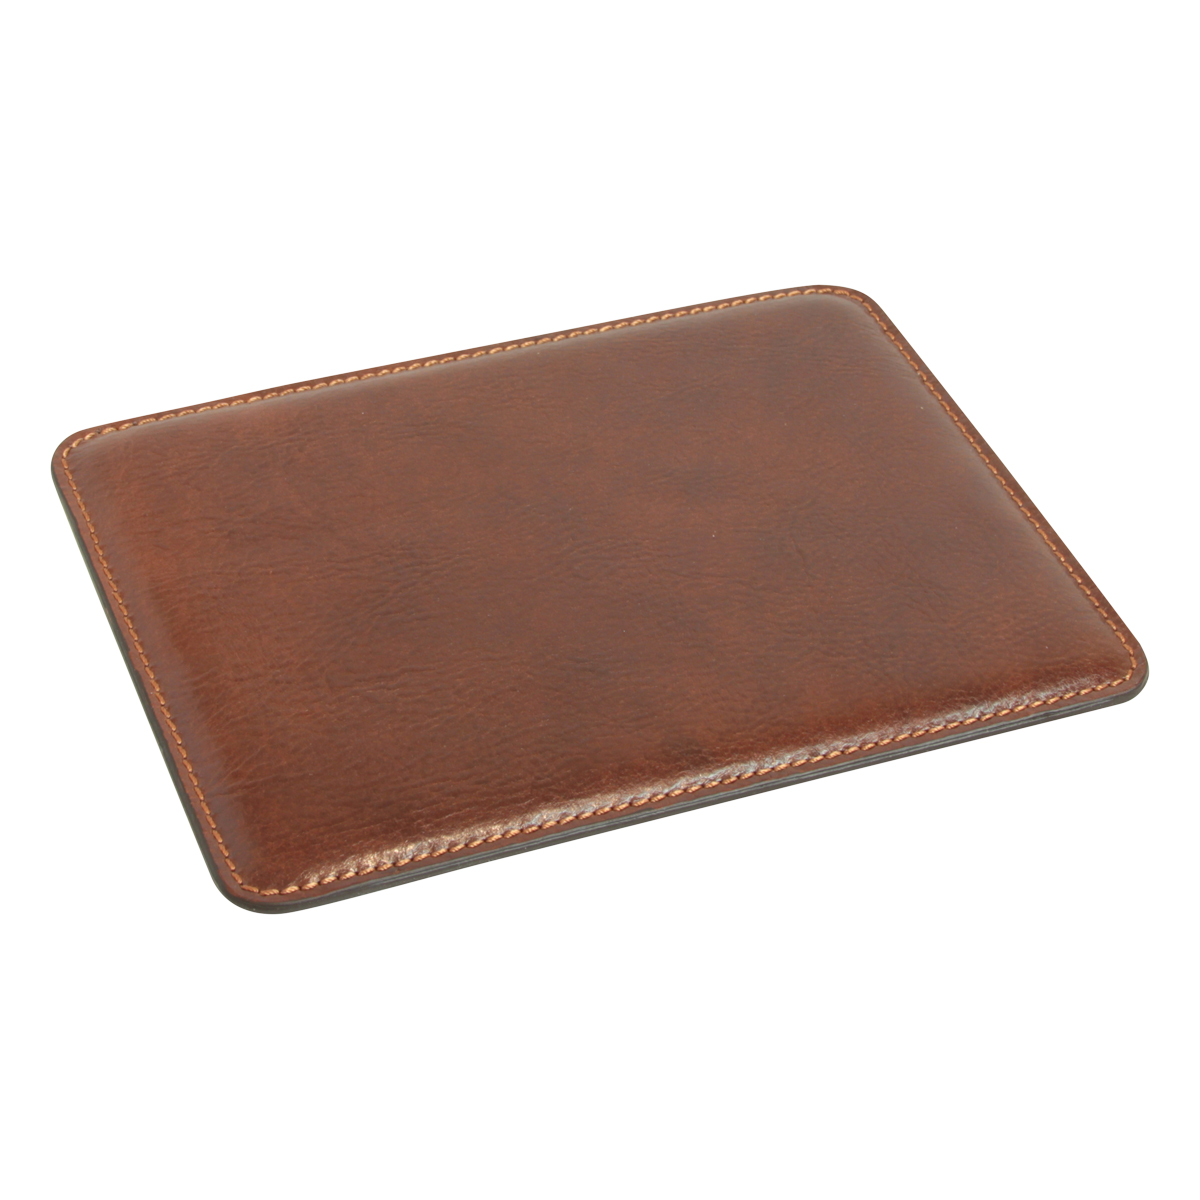 Leather Mouse pad - Brown | 752005MA | EURO | Old Angler Firenze